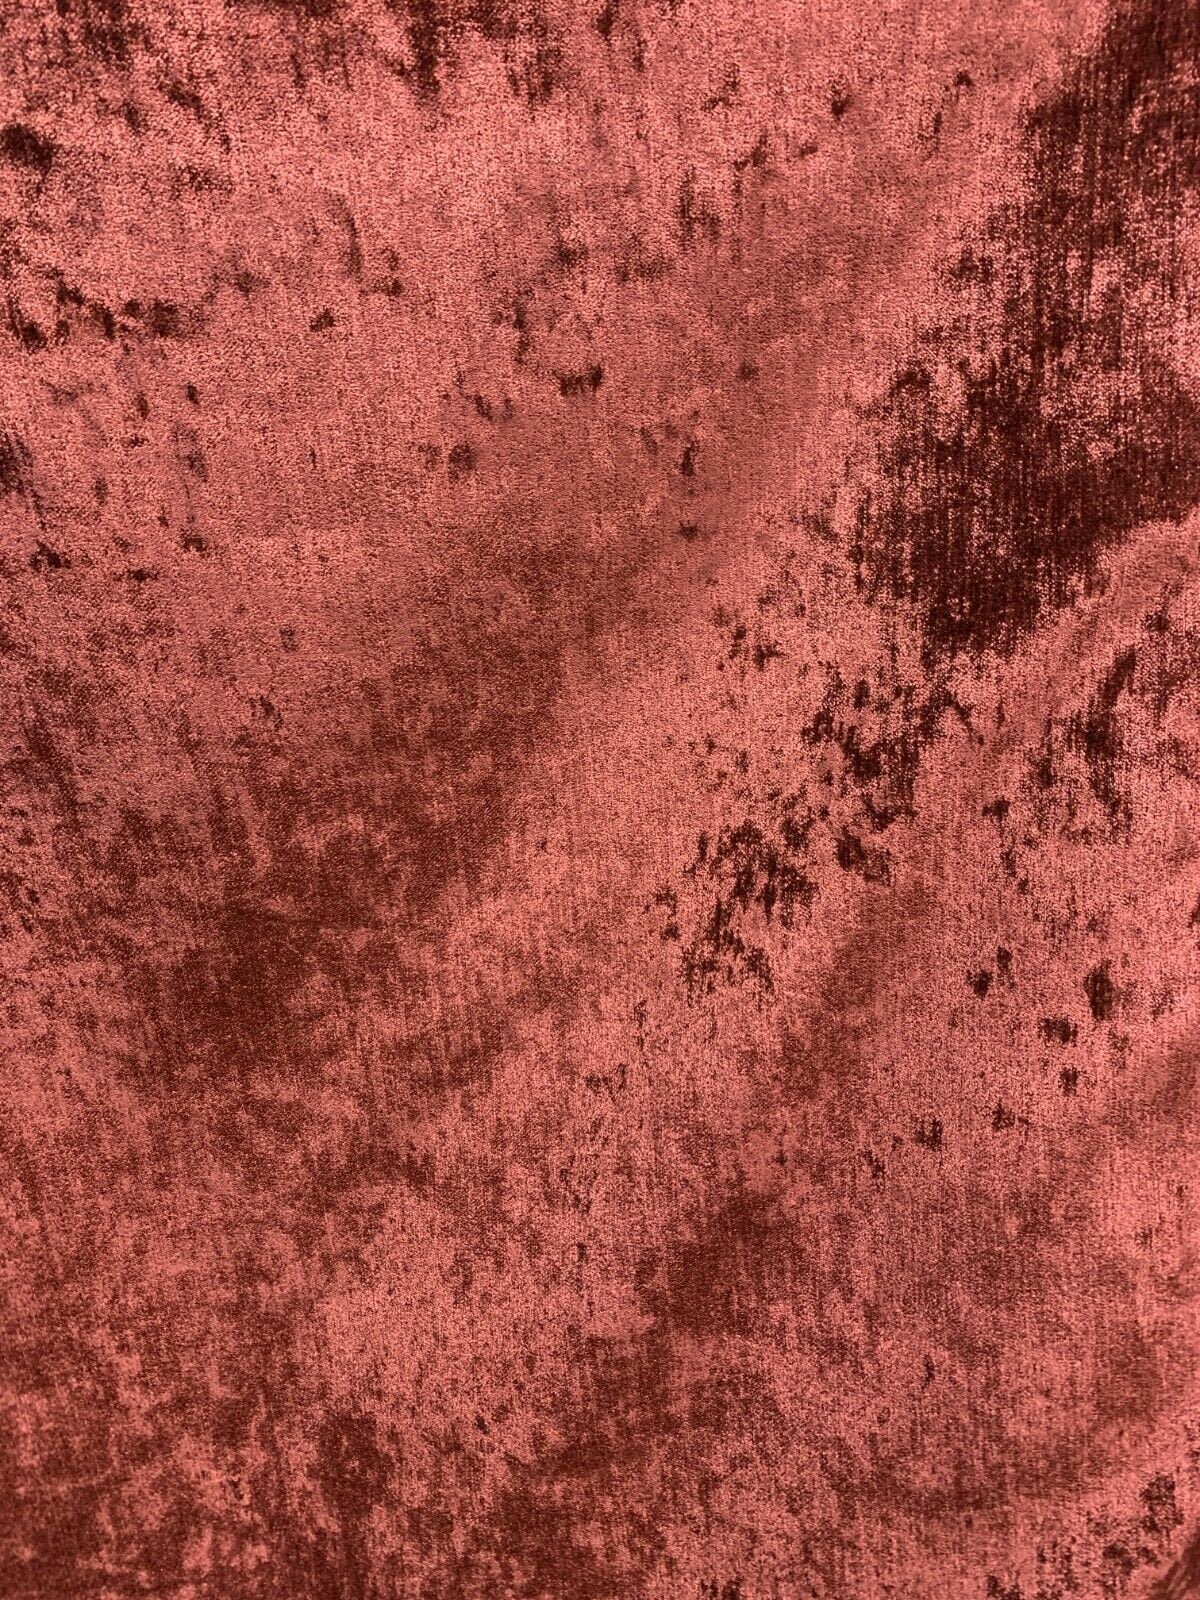 COPPER RED Solid Chenille Velvet Upholstery Drapery Fabric (56 in.) Sold By The Yard